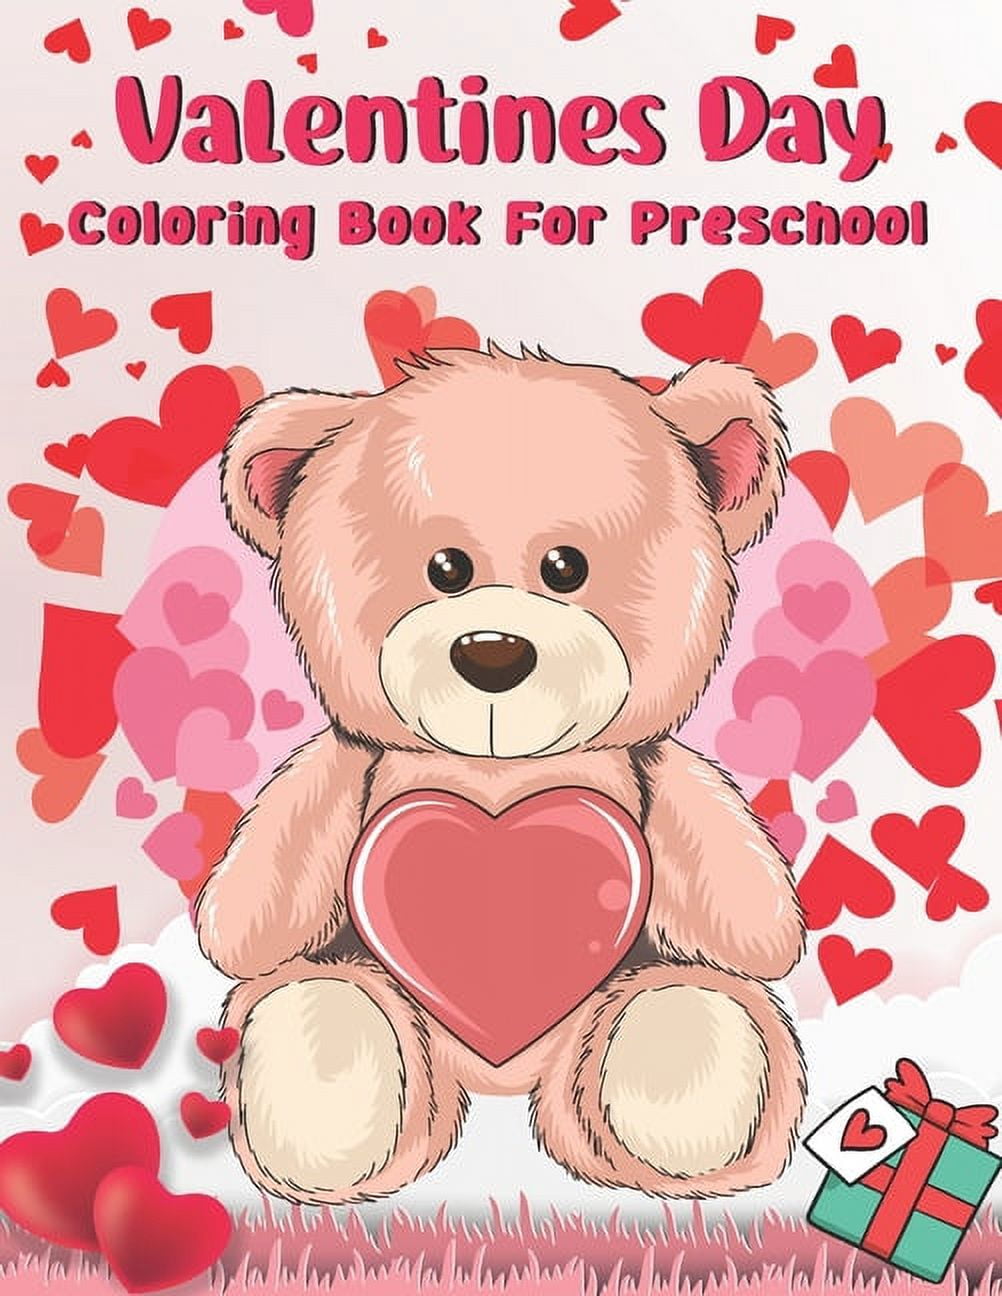 ABC Valentines Day Activity Book for Kids Ages 4-8: Preschool Love Workbook  with Stress Relief Valentine Crafts Cards for Toddlers Girls and Boys - Co  (Paperback)